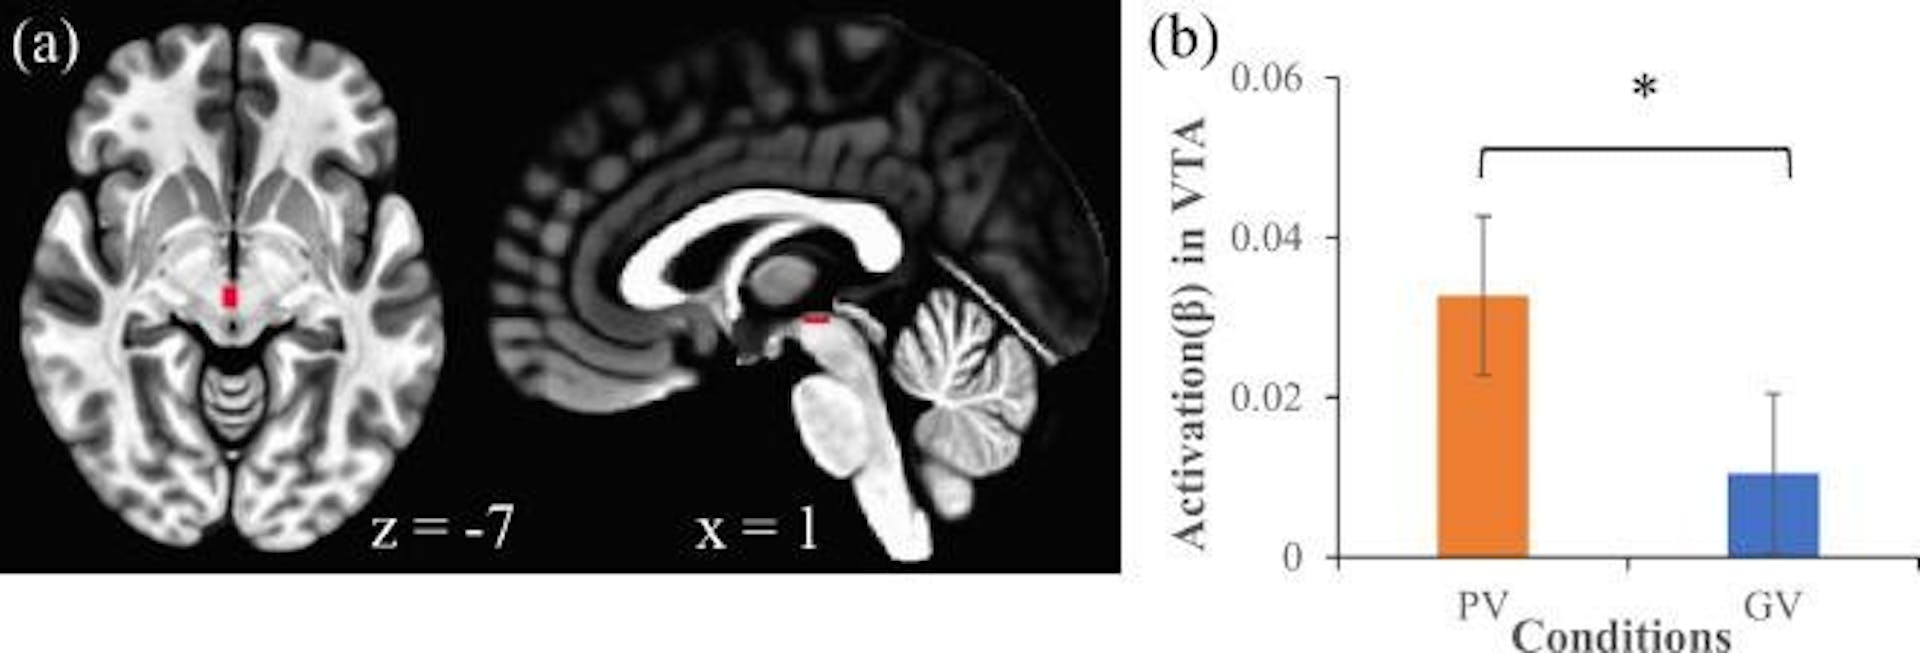 The image presents two parts: (a) brain scans indicating activity in specific brain regions, related to viewing personalized content, and (b) a bar graph showing a significant difference in activity levels in the ventral tegmental area (VTA) when subjects viewed personalized versus generalized videos, as per the key denoted by an asterisk. This suggests that personalized content may evoke a stronger neural response linked to reward processing.